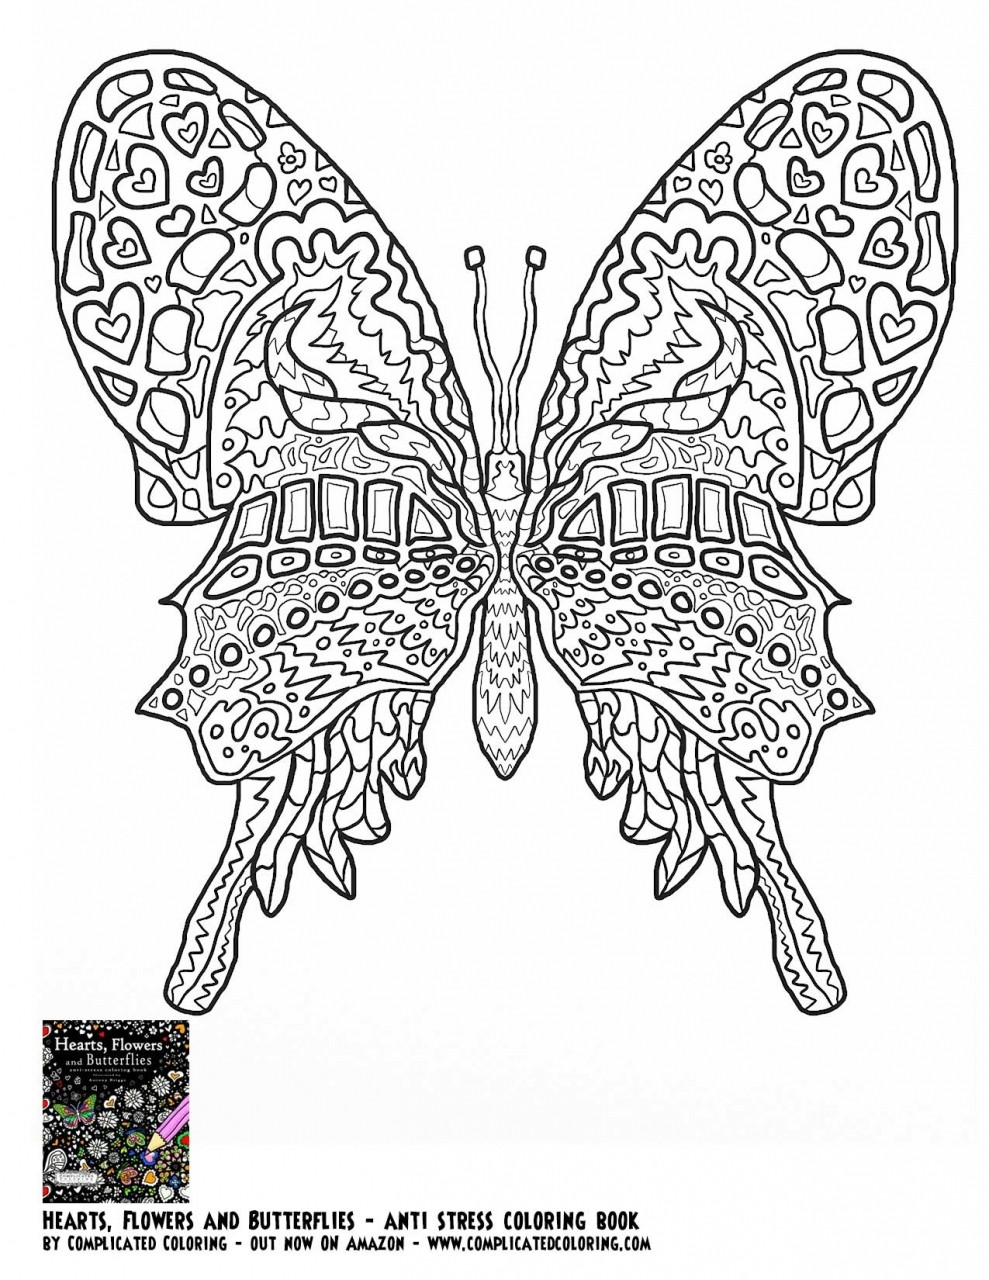 Coloring Pages For Adults To Print Out
 Get This Difficult Adult Coloring Pages to Print Out